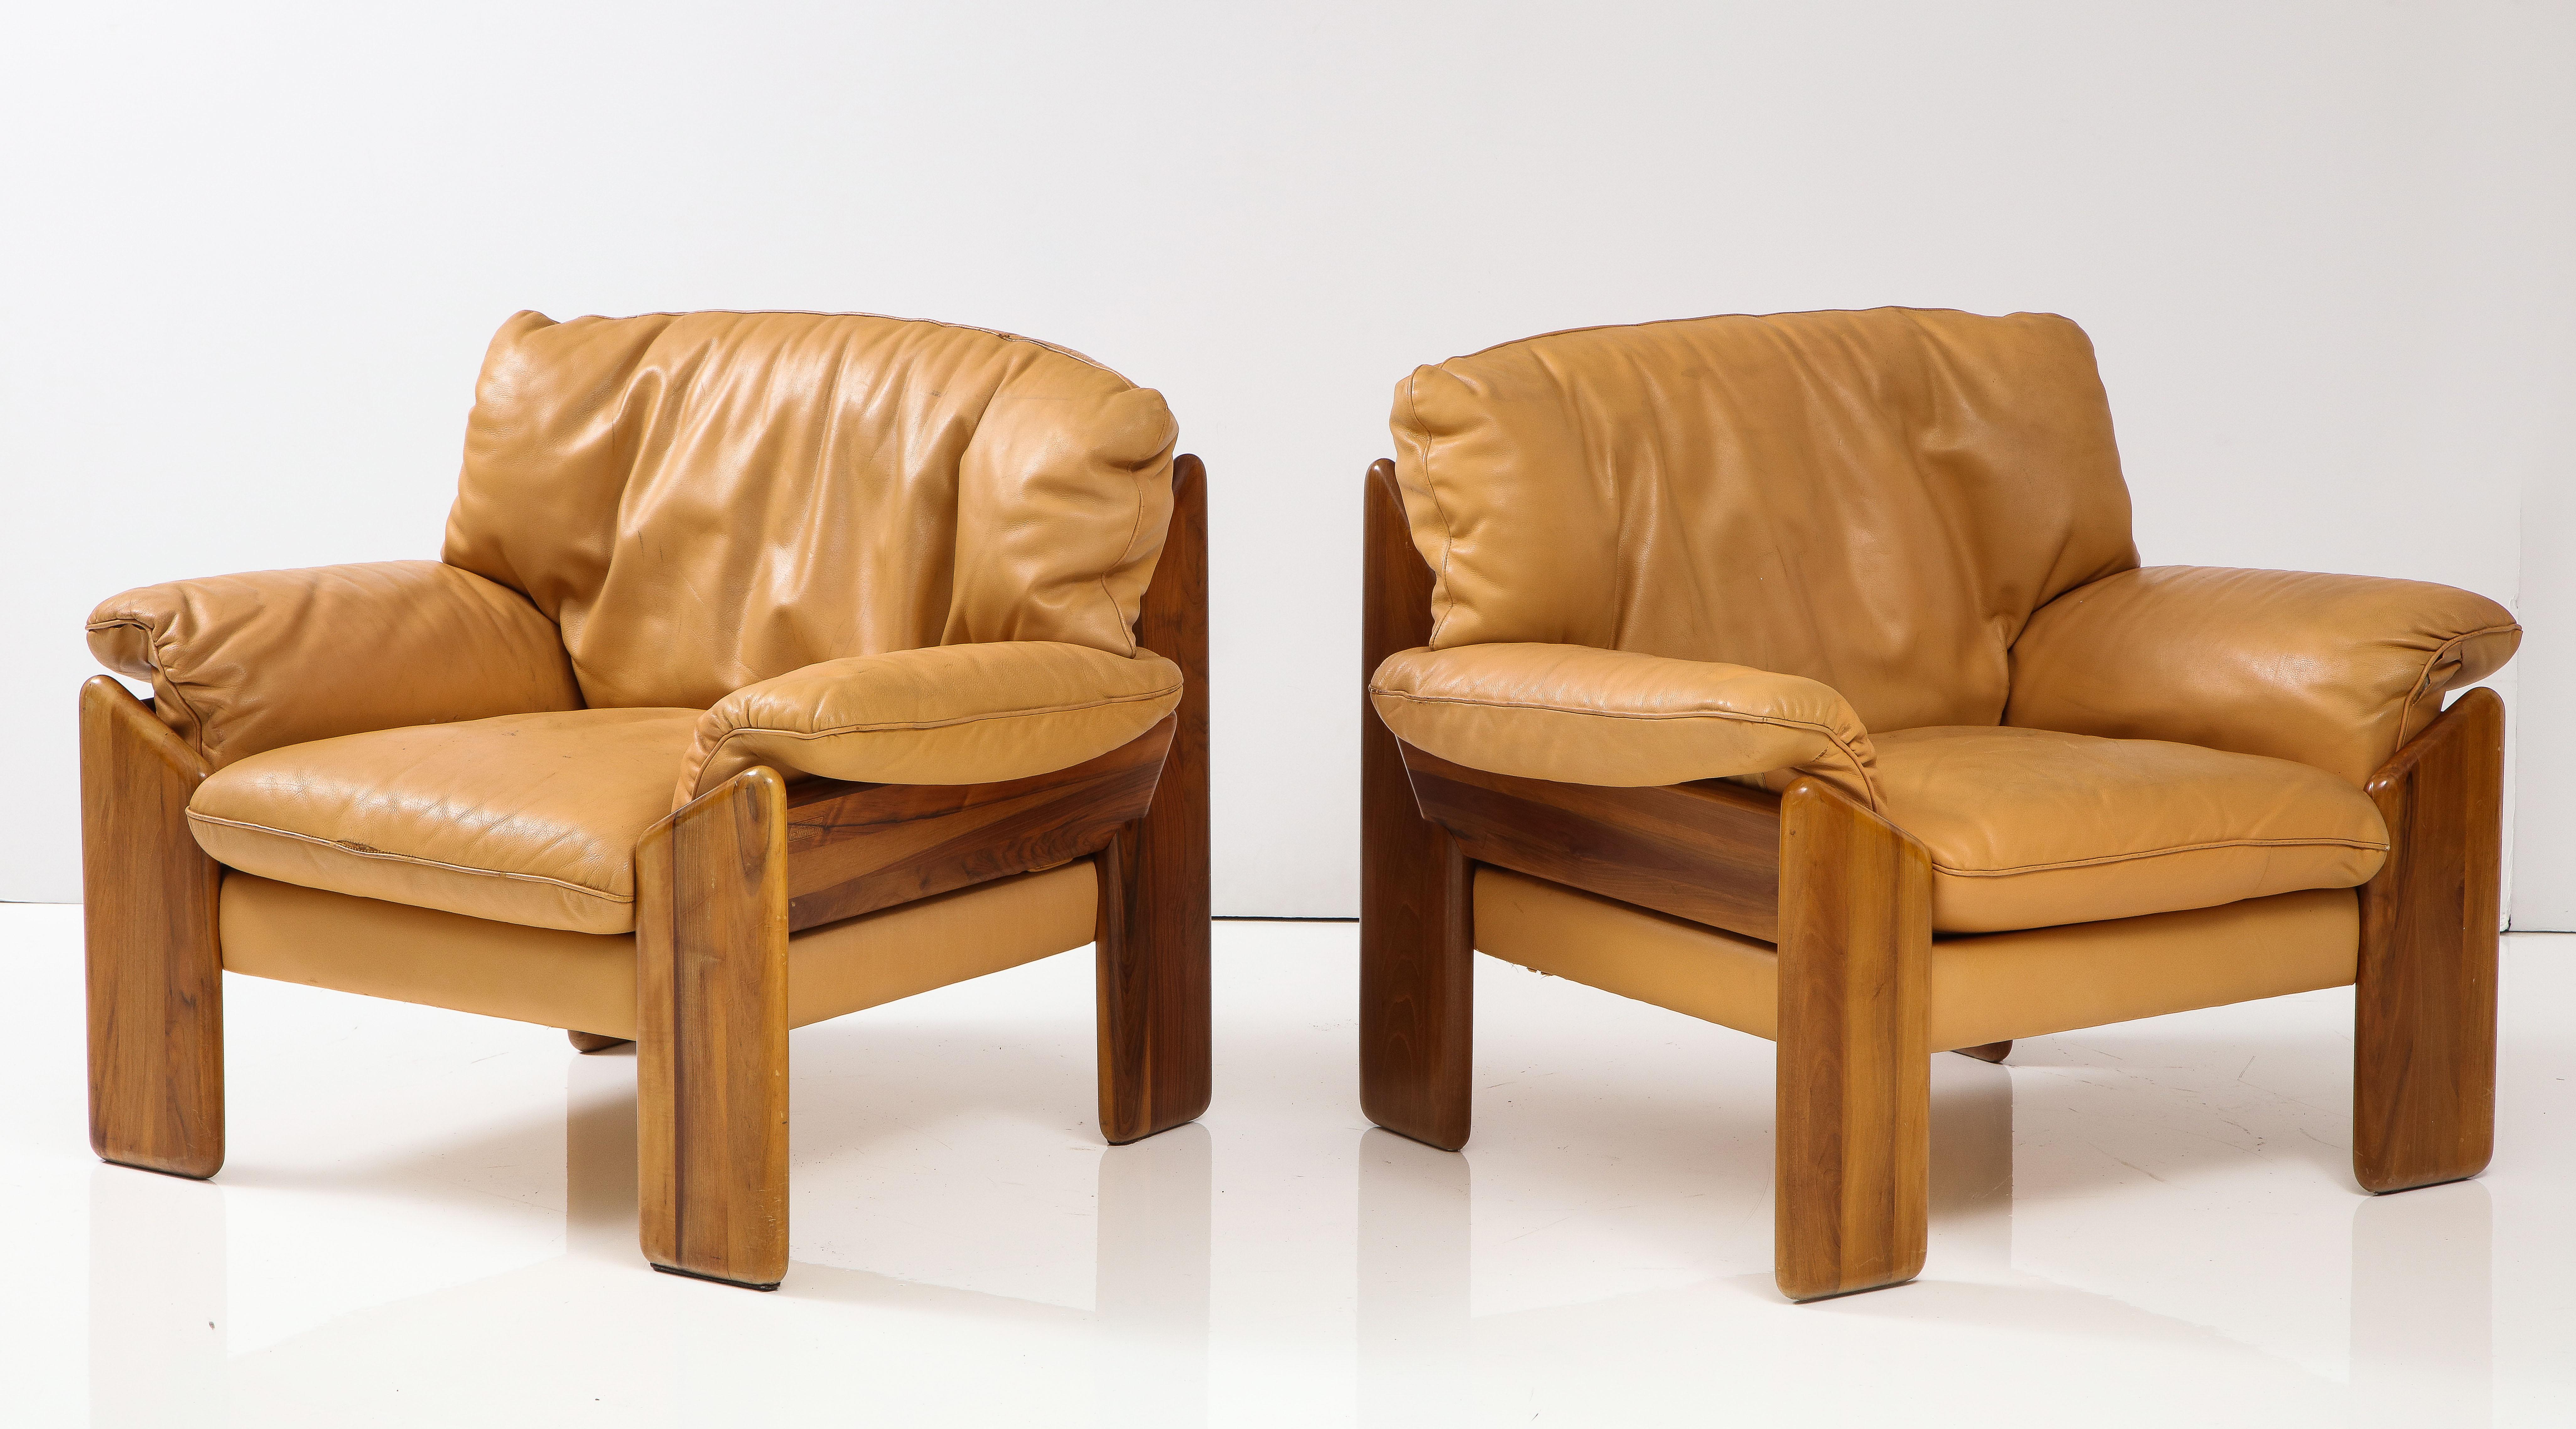 Late 20th Century Pair of Italian Walnut, Leather Lounge Chairs, by Sapporo, Mobil Girgi, 1970's